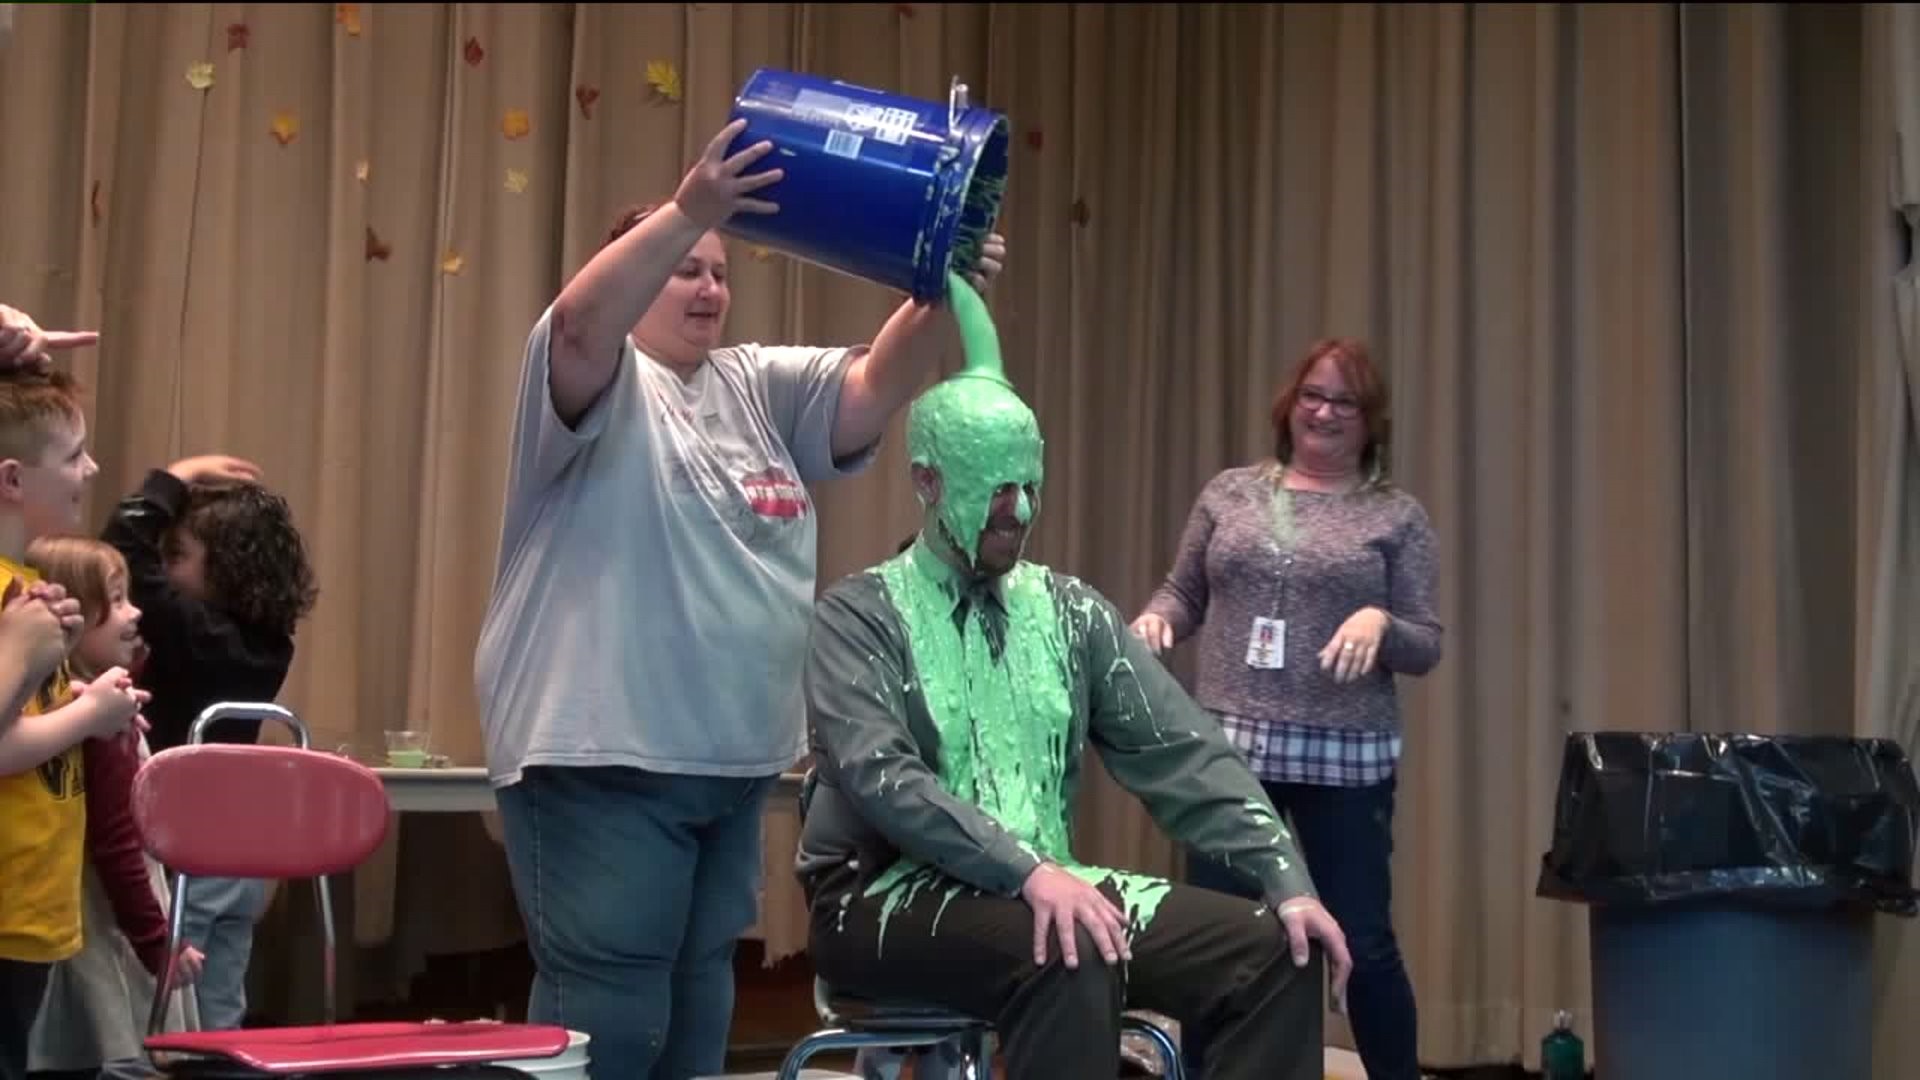 Slime Time at Carbon County School